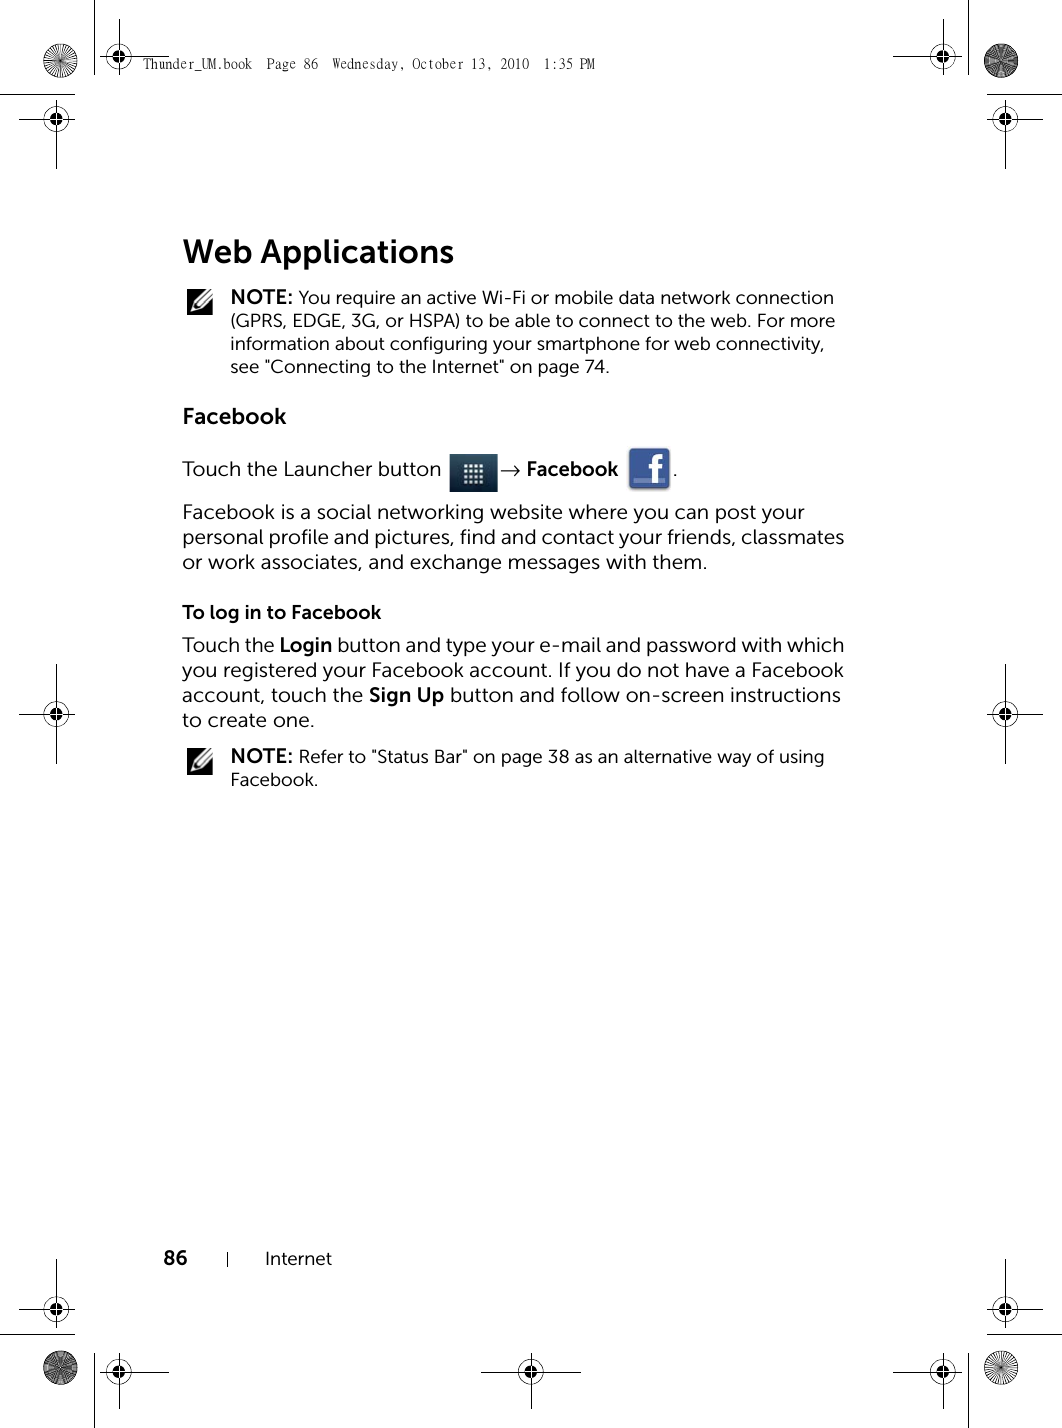 86 InternetWeb Applications NOTE: You require an active Wi-Fi or mobile data network connection (GPRS, EDGE, 3G, or HSPA) to be able to connect to the web. For more information about configuring your smartphone for web connectivity, see &quot;Connecting to the Internet&quot; on page 74.FacebookTouch the Launcher button  → Facebook .Facebook is a social networking website where you can post your personal profile and pictures, find and contact your friends, classmates or work associates, and exchange messages with them.To log in to FacebookTouch the Login button and type your e-mail and password with which you registered your Facebook account. If you do not have a Facebook account, touch the Sign Up button and follow on-screen instructions to create one. NOTE: Refer to &quot;Status Bar&quot; on page 38 as an alternative way of using Facebook.Thunder_UM.book  Page 86  Wednesday, October 13, 2010  1:35 PM